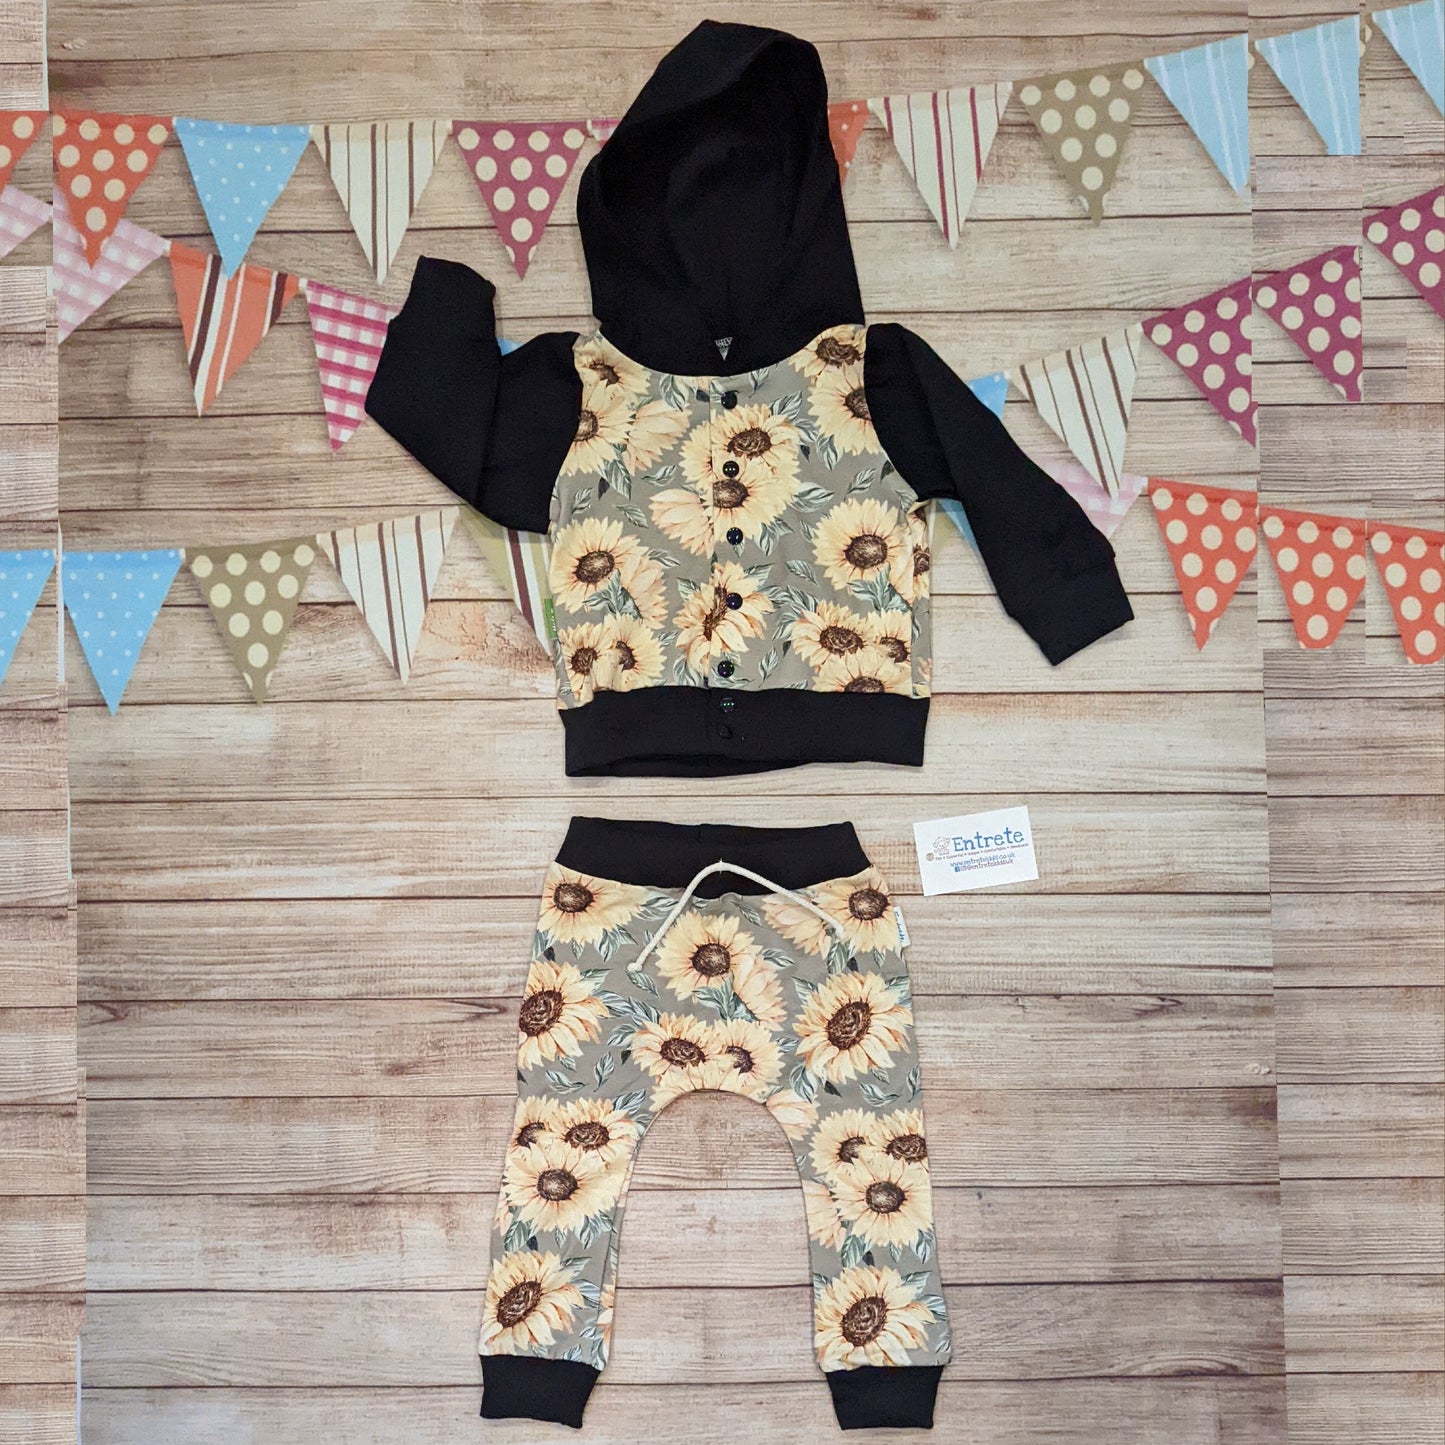 Pretty sunflowers harem joggers, handmade using sunflowers cotton French terry and black cotton ribbing. Shown with a matching hoodie.